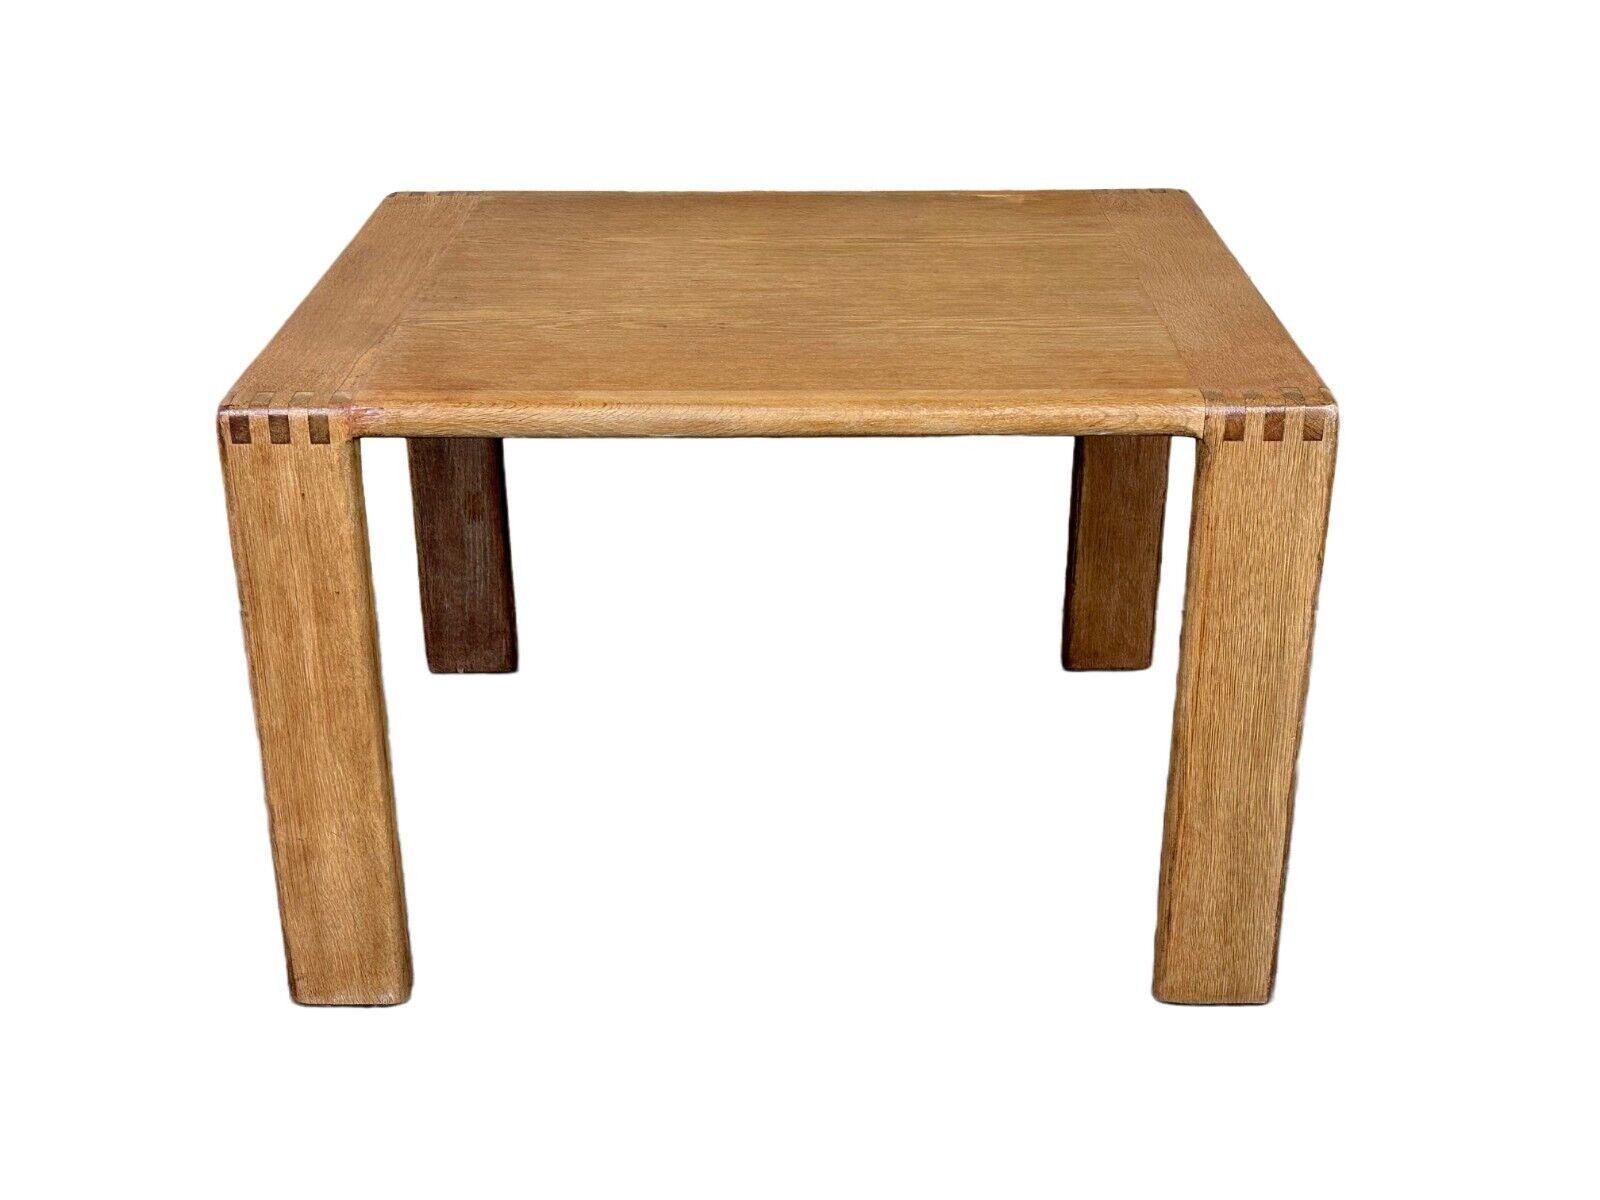 60s 70s oak coffee table Esko Pajamies Asko Finland

Object: side table / coffee table

Manufacturer: Asco

Condition: Good - Vintage

Age: around 1960-1970

Dimensions:

Width = 81.5cm
Depth = 65cm
Height = 53cm

Other notes:

The